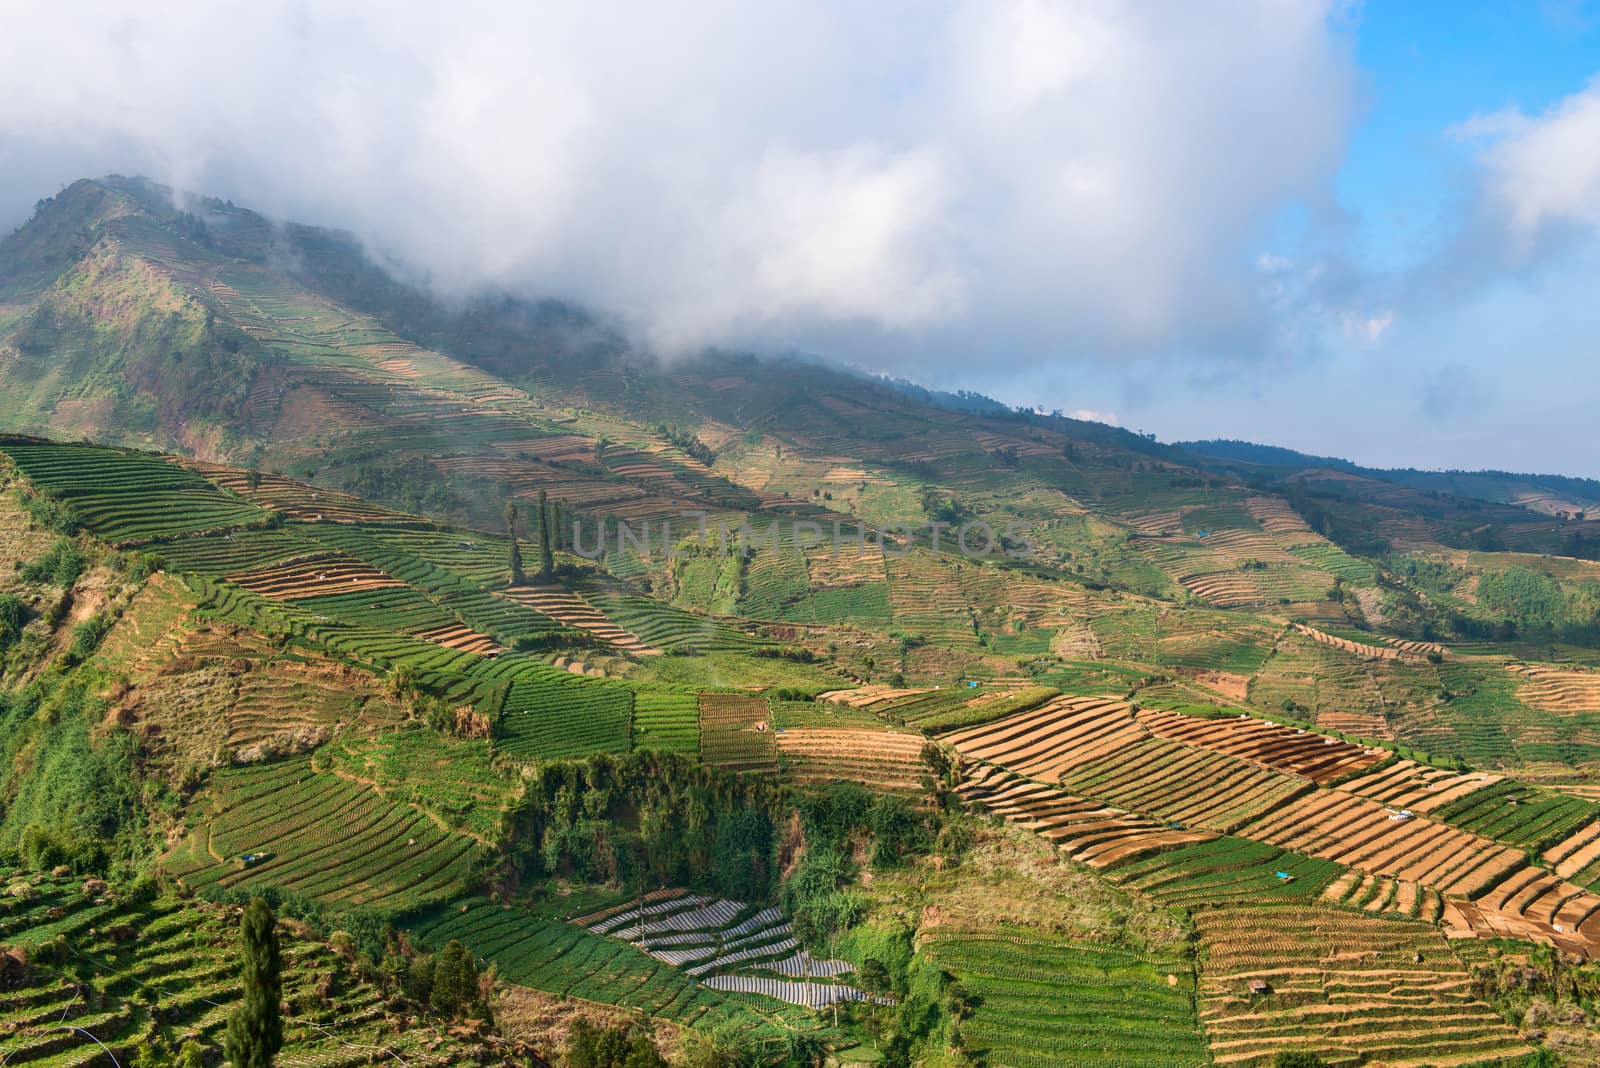 Terraced agriculture fields of Dieng plateau under white clouds, Java island, Indonesia